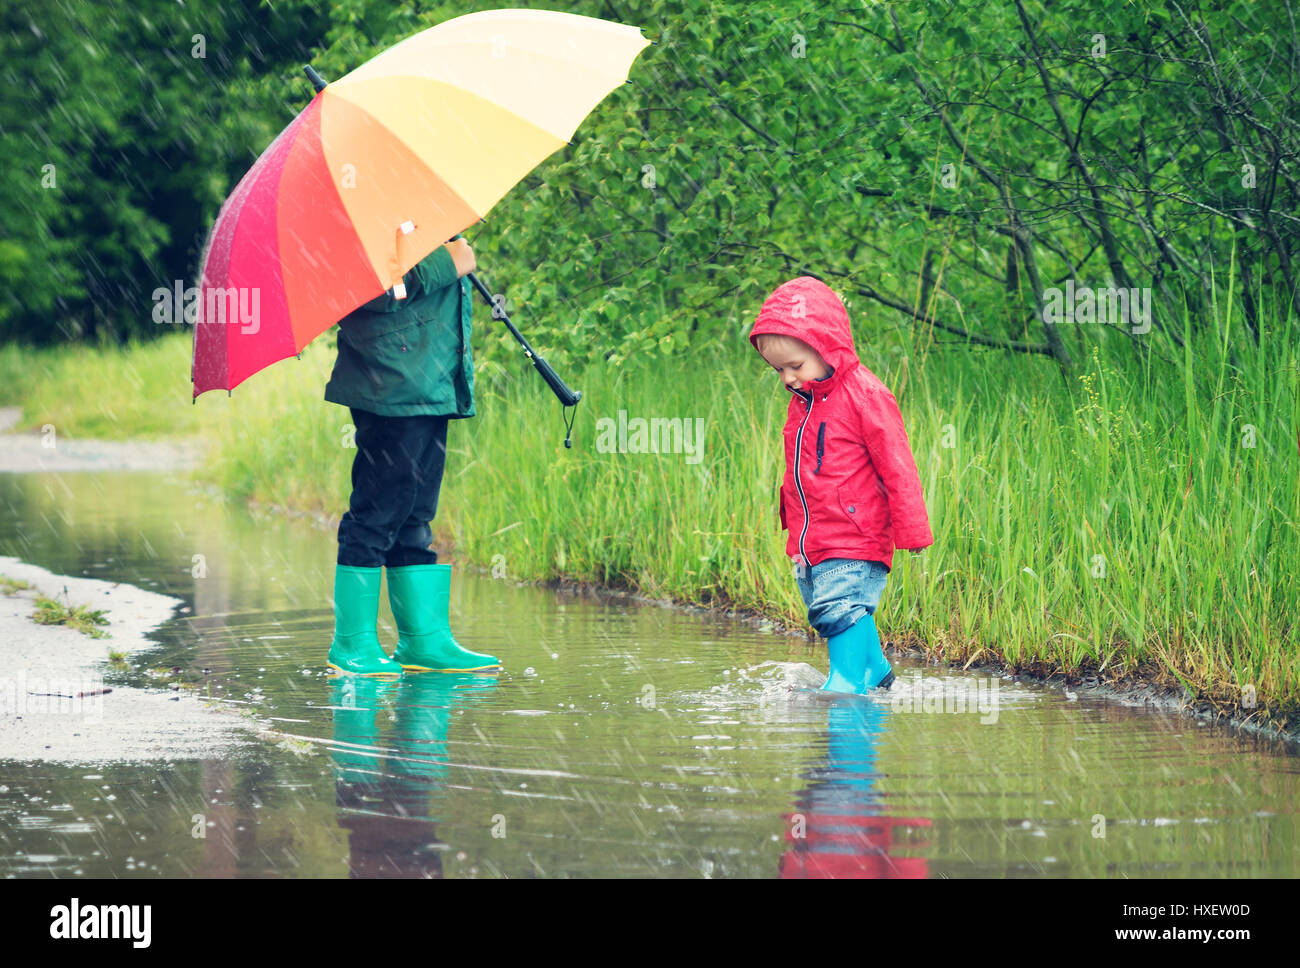 Children walking in wellies in puddle on rainy weather Stock Photo